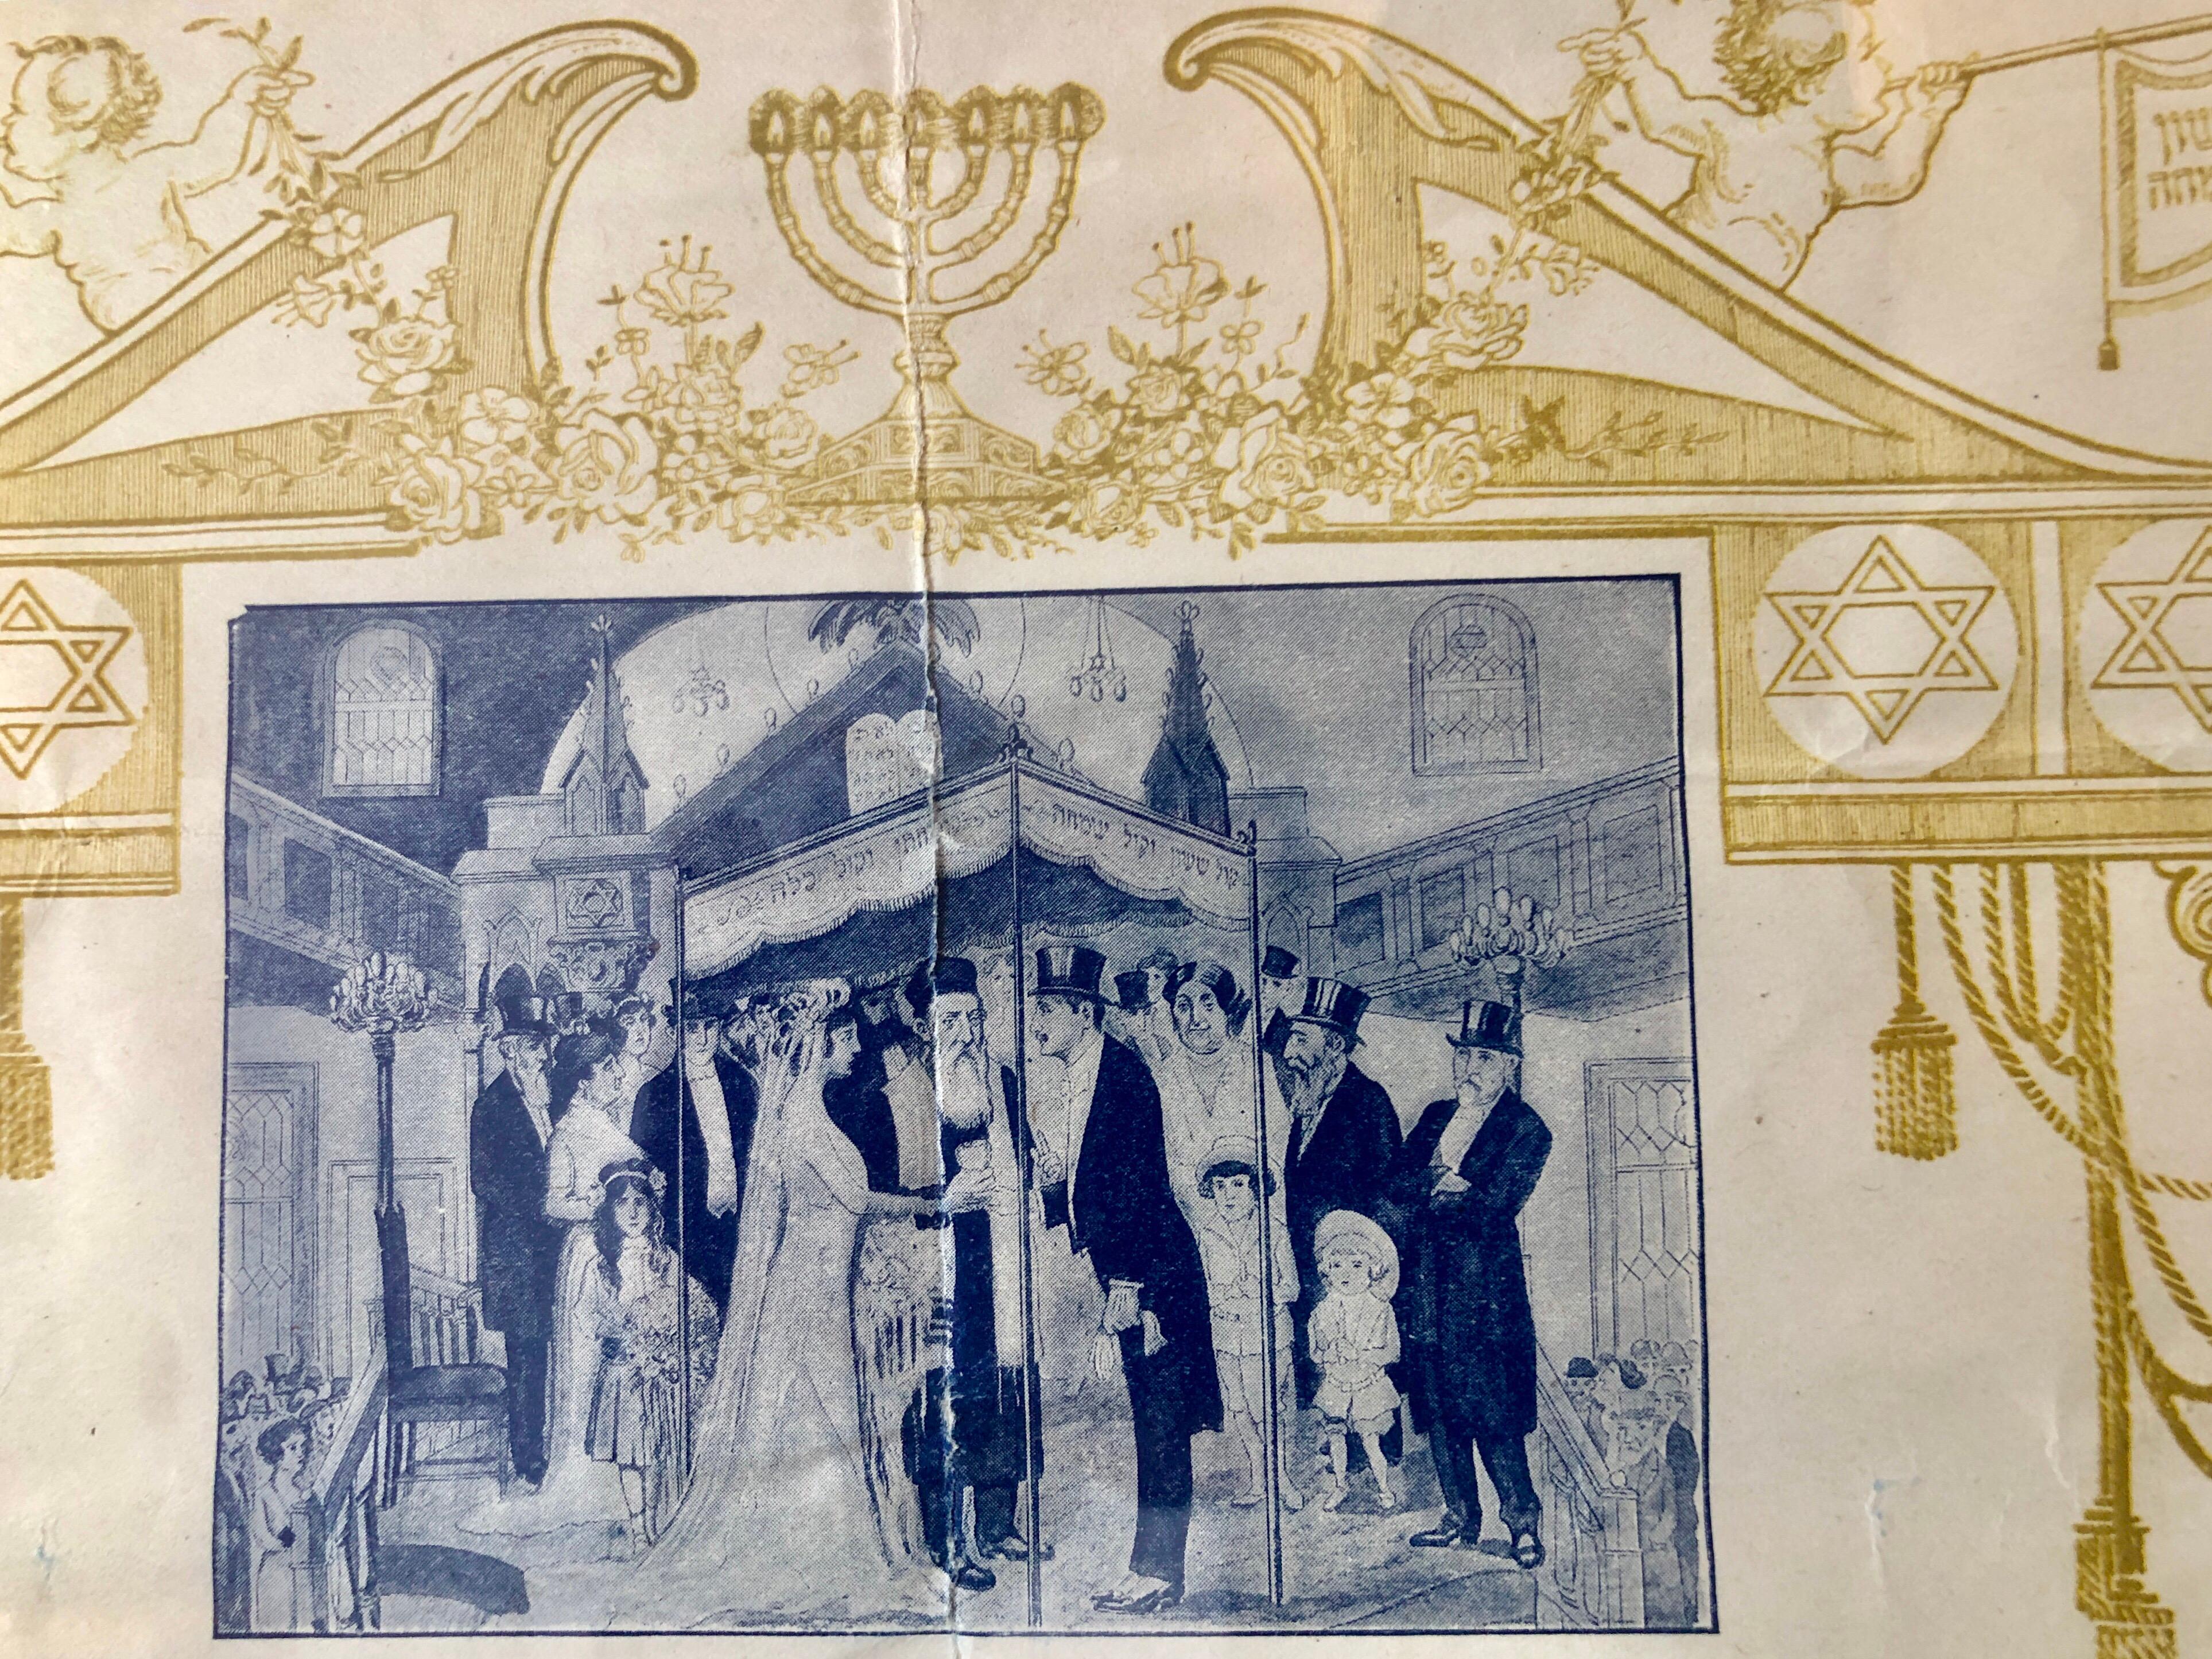 Rare 1915 Early 20c Century Ketubah Hand Written Text NYC Hebrew Publishing co.  - Gothic Art by Leon Israel (Lola)